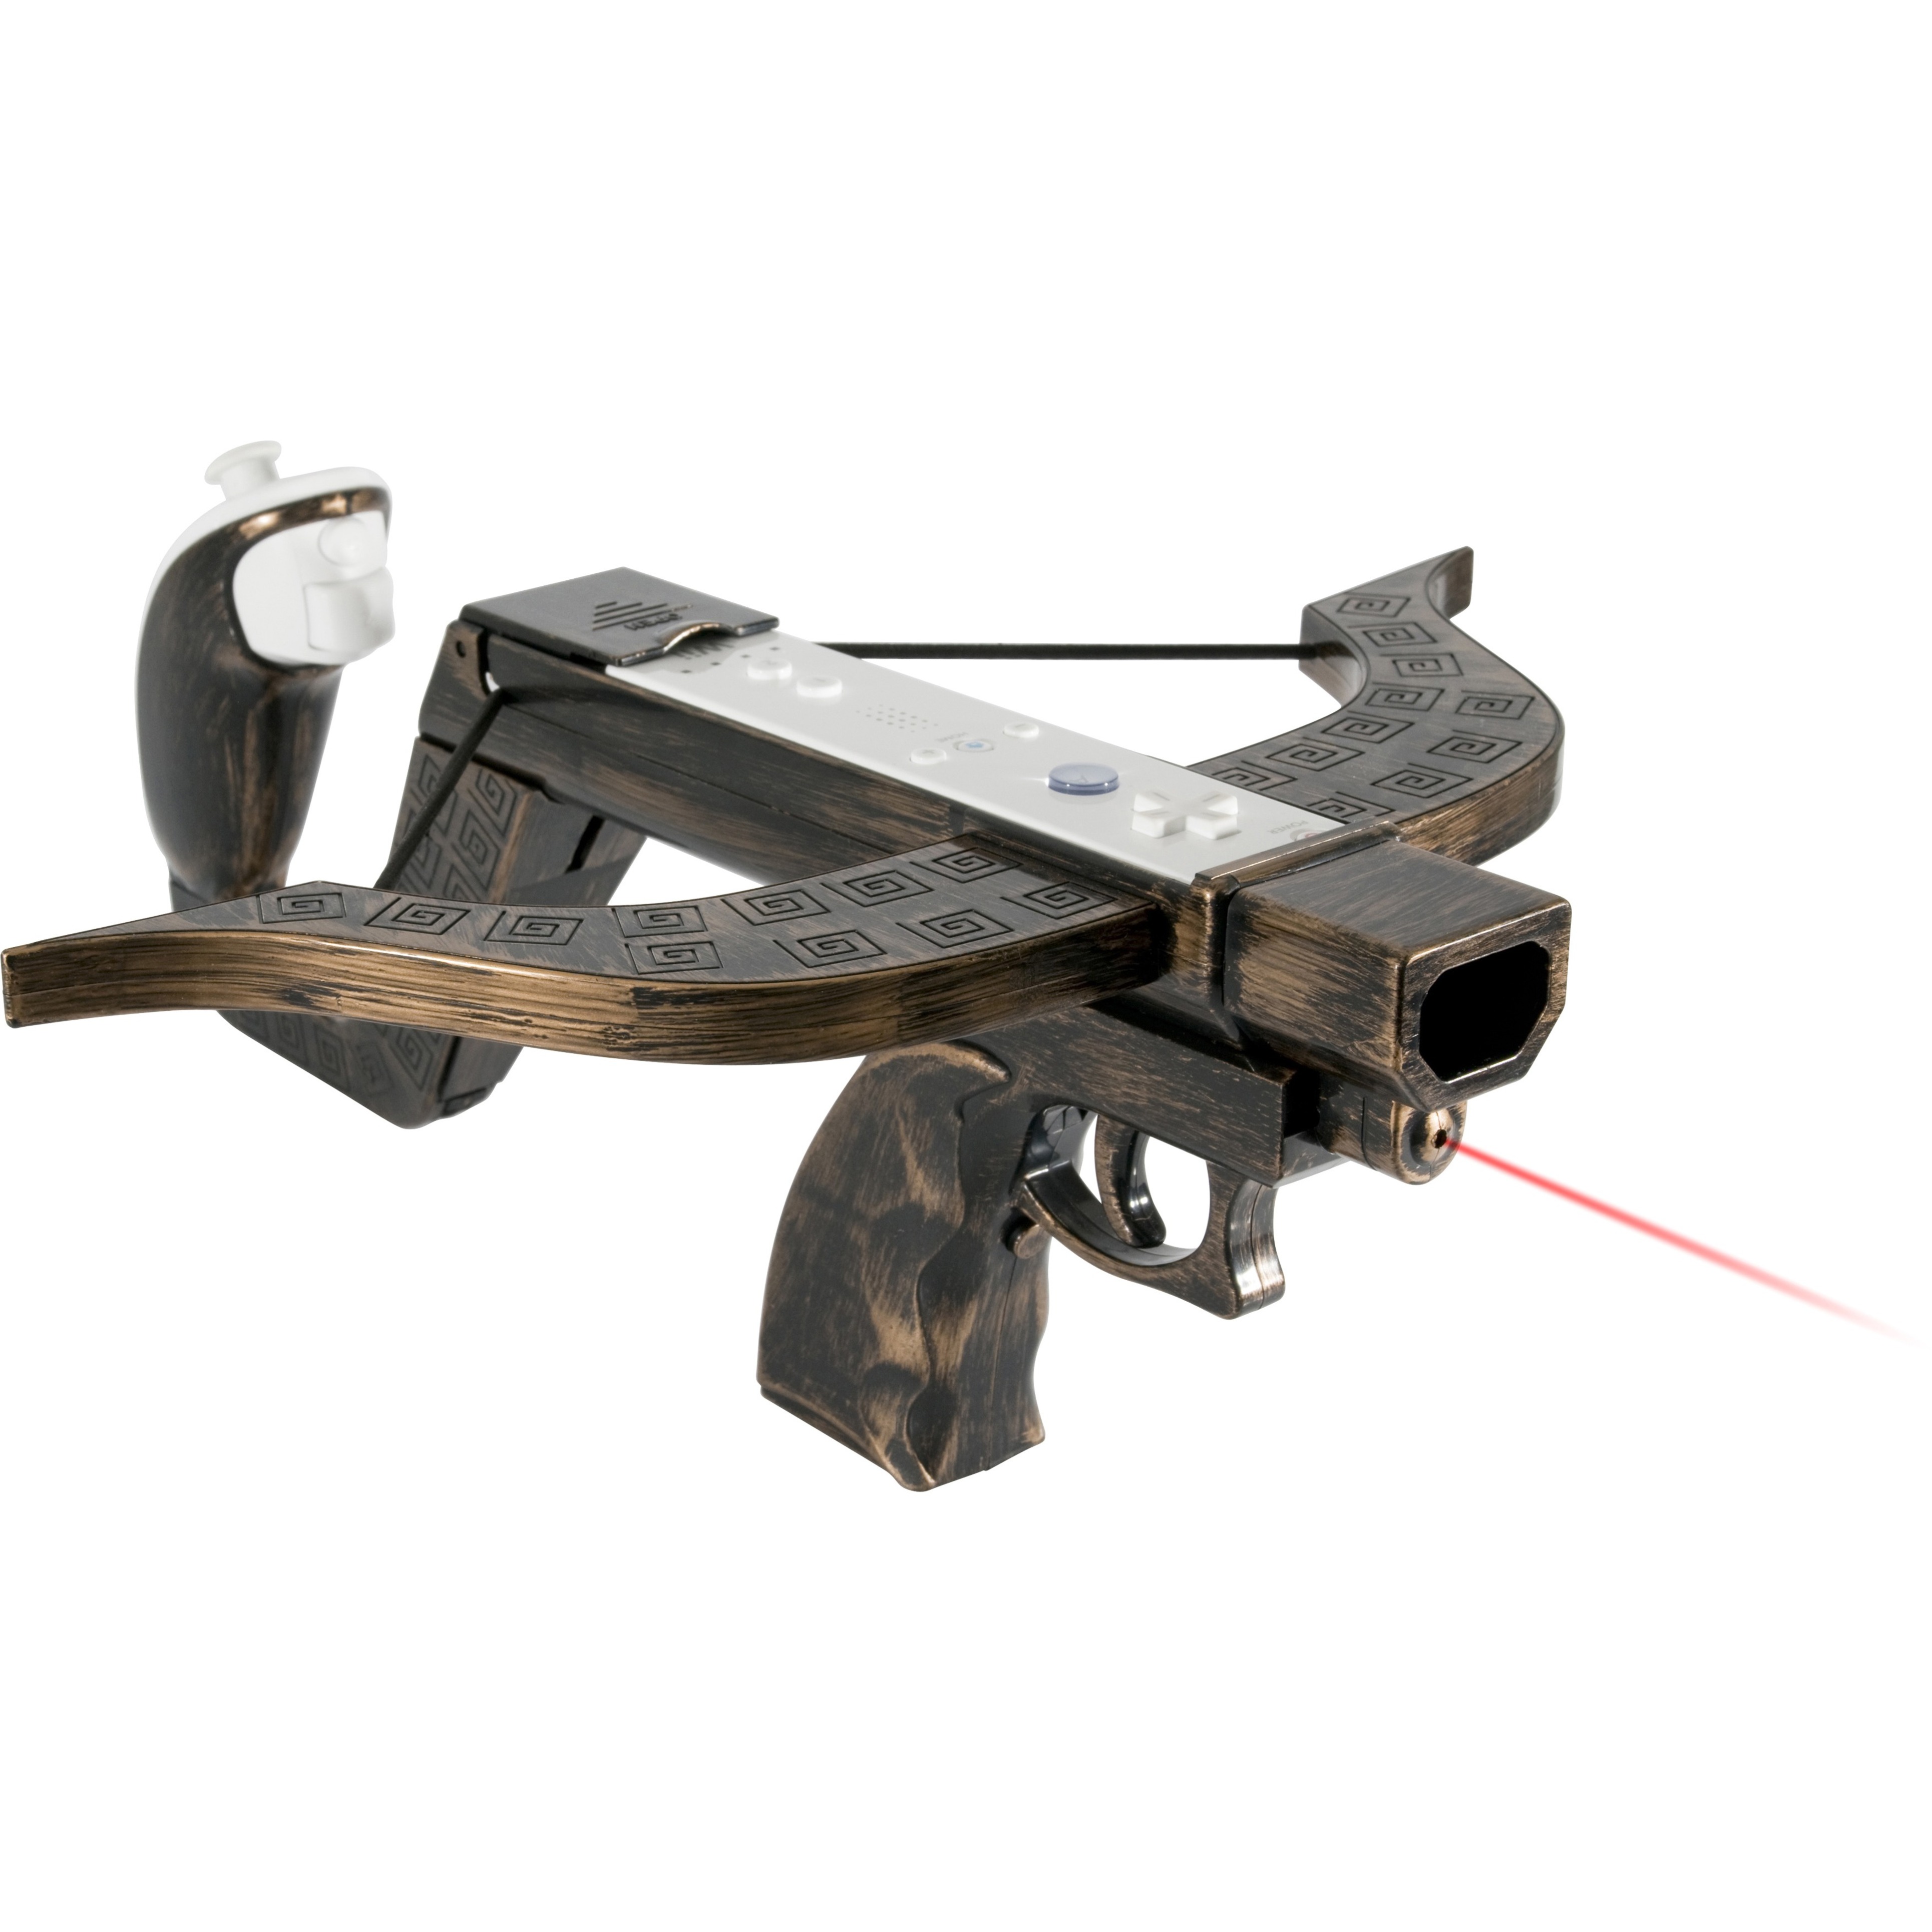 CTA Digital Crossbow for Wii - image 1 of 2